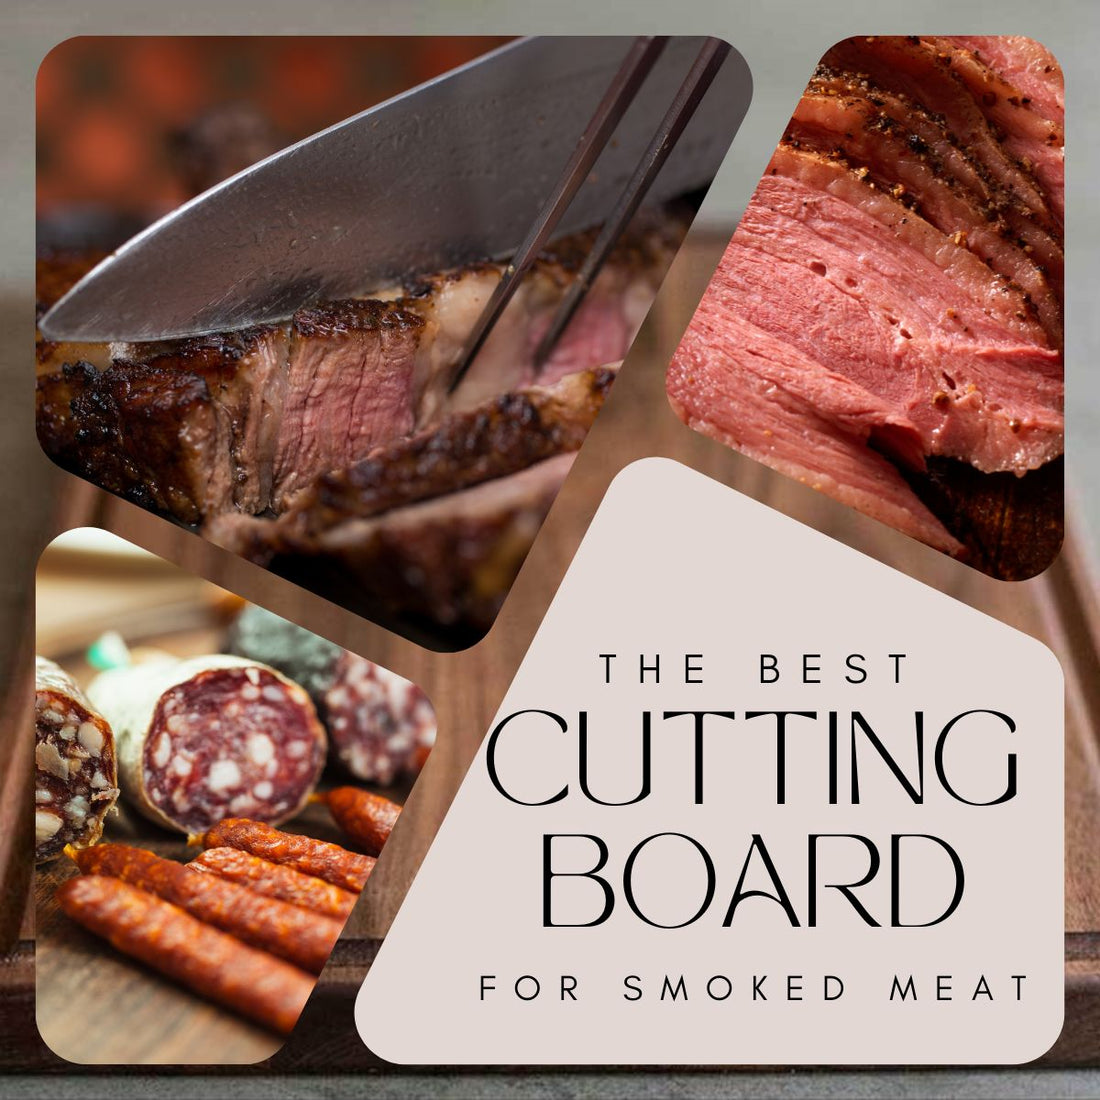 collage image of smoked meat showing the best cutting board for smoked meat